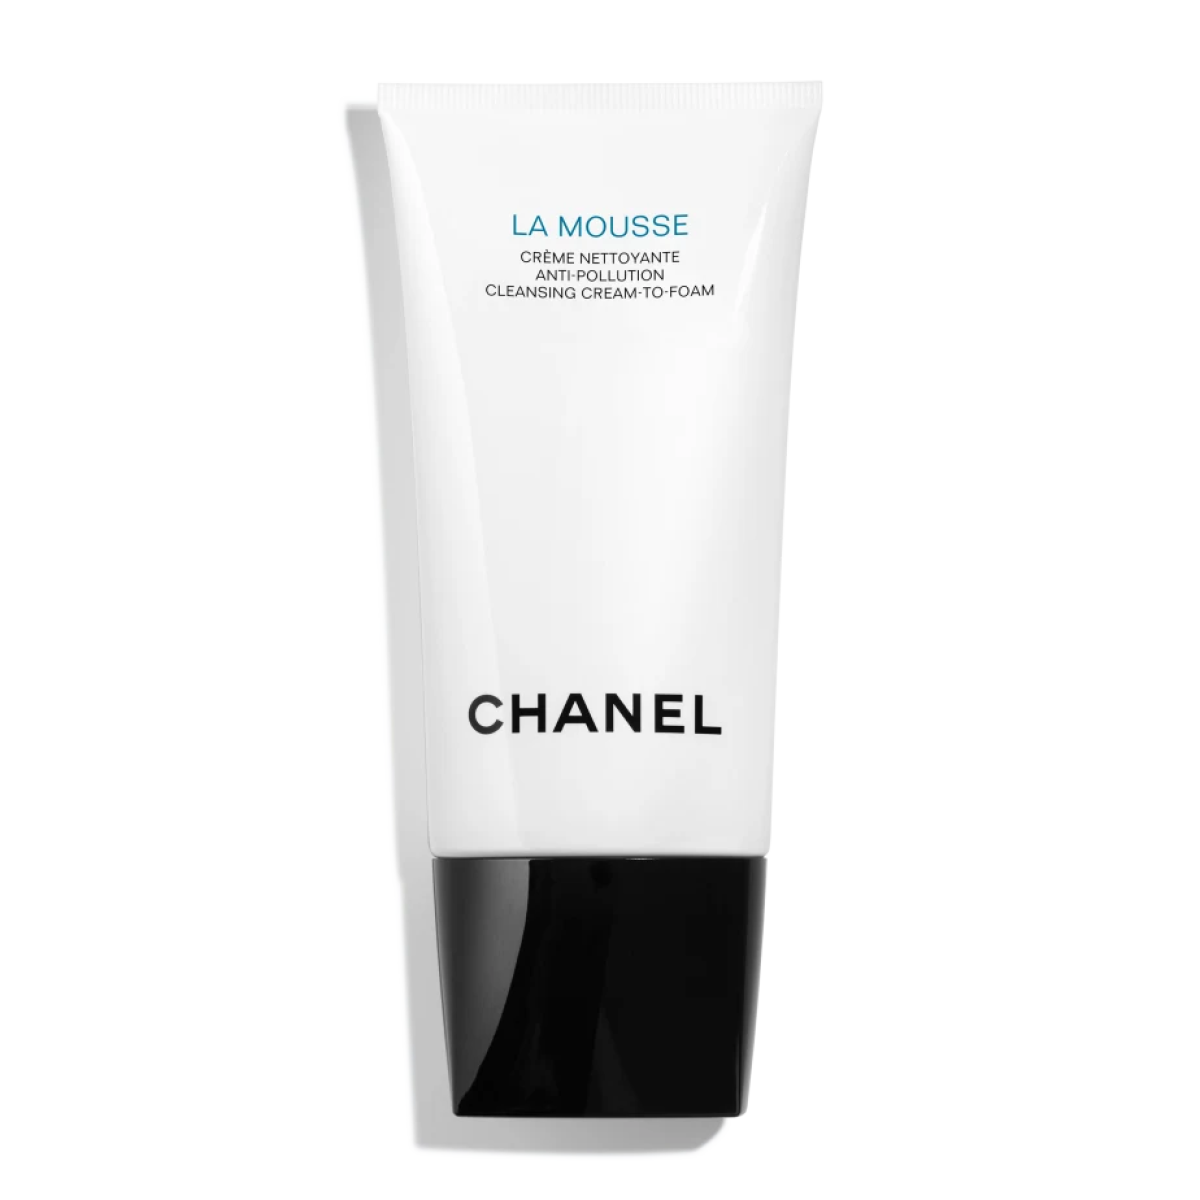 Chanel cleanser